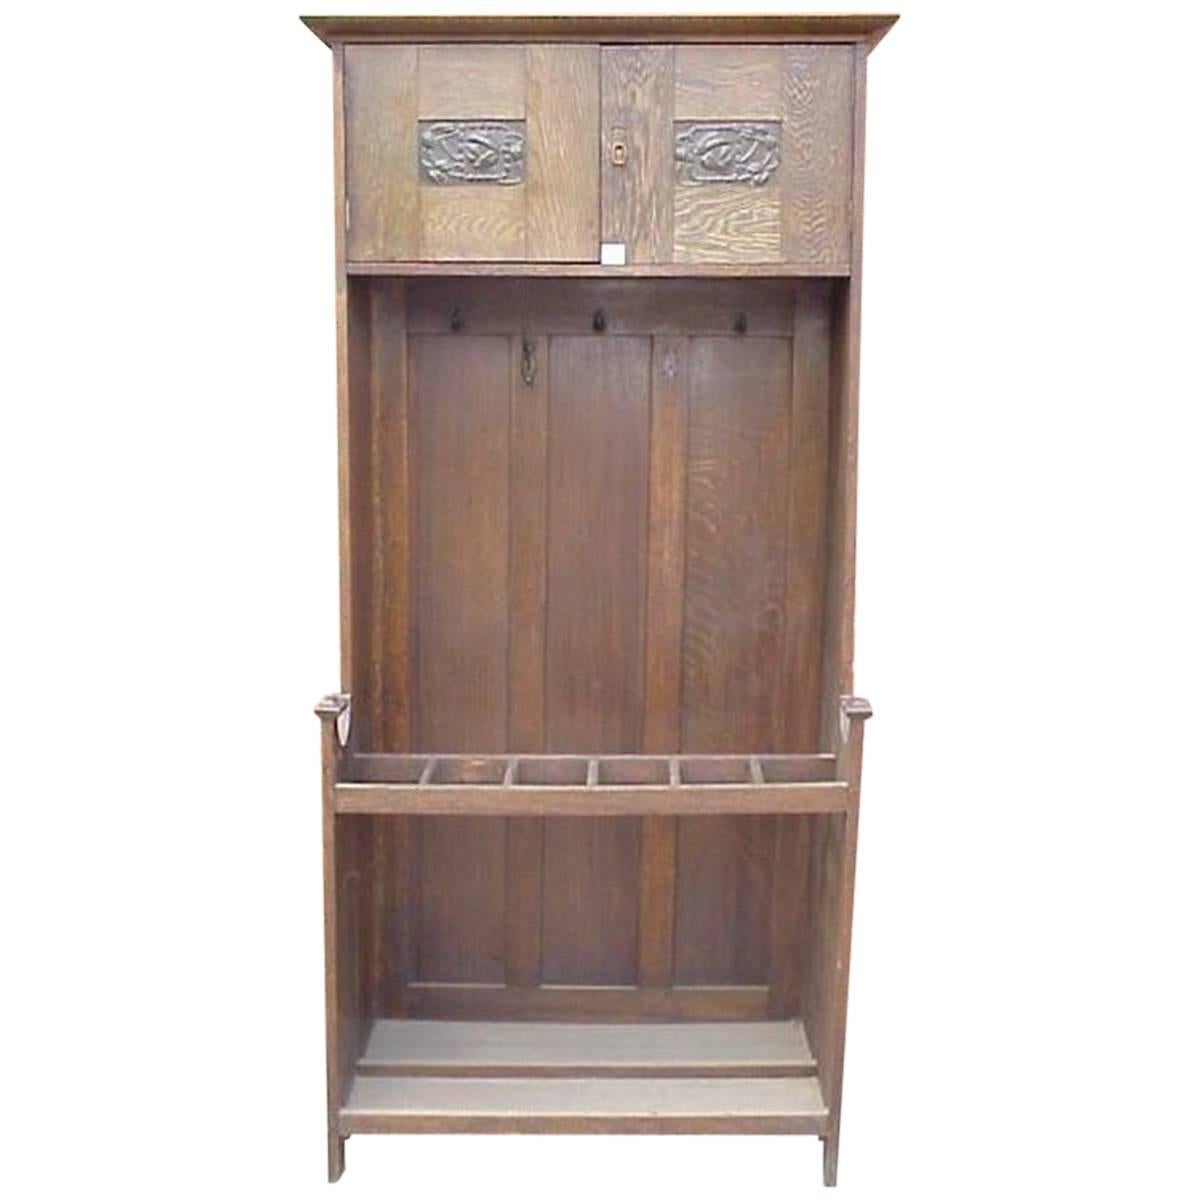 E A Taylor Attributed, Made by Wylie & Lochhead. An Arts & Crafts Oak Hall Stand